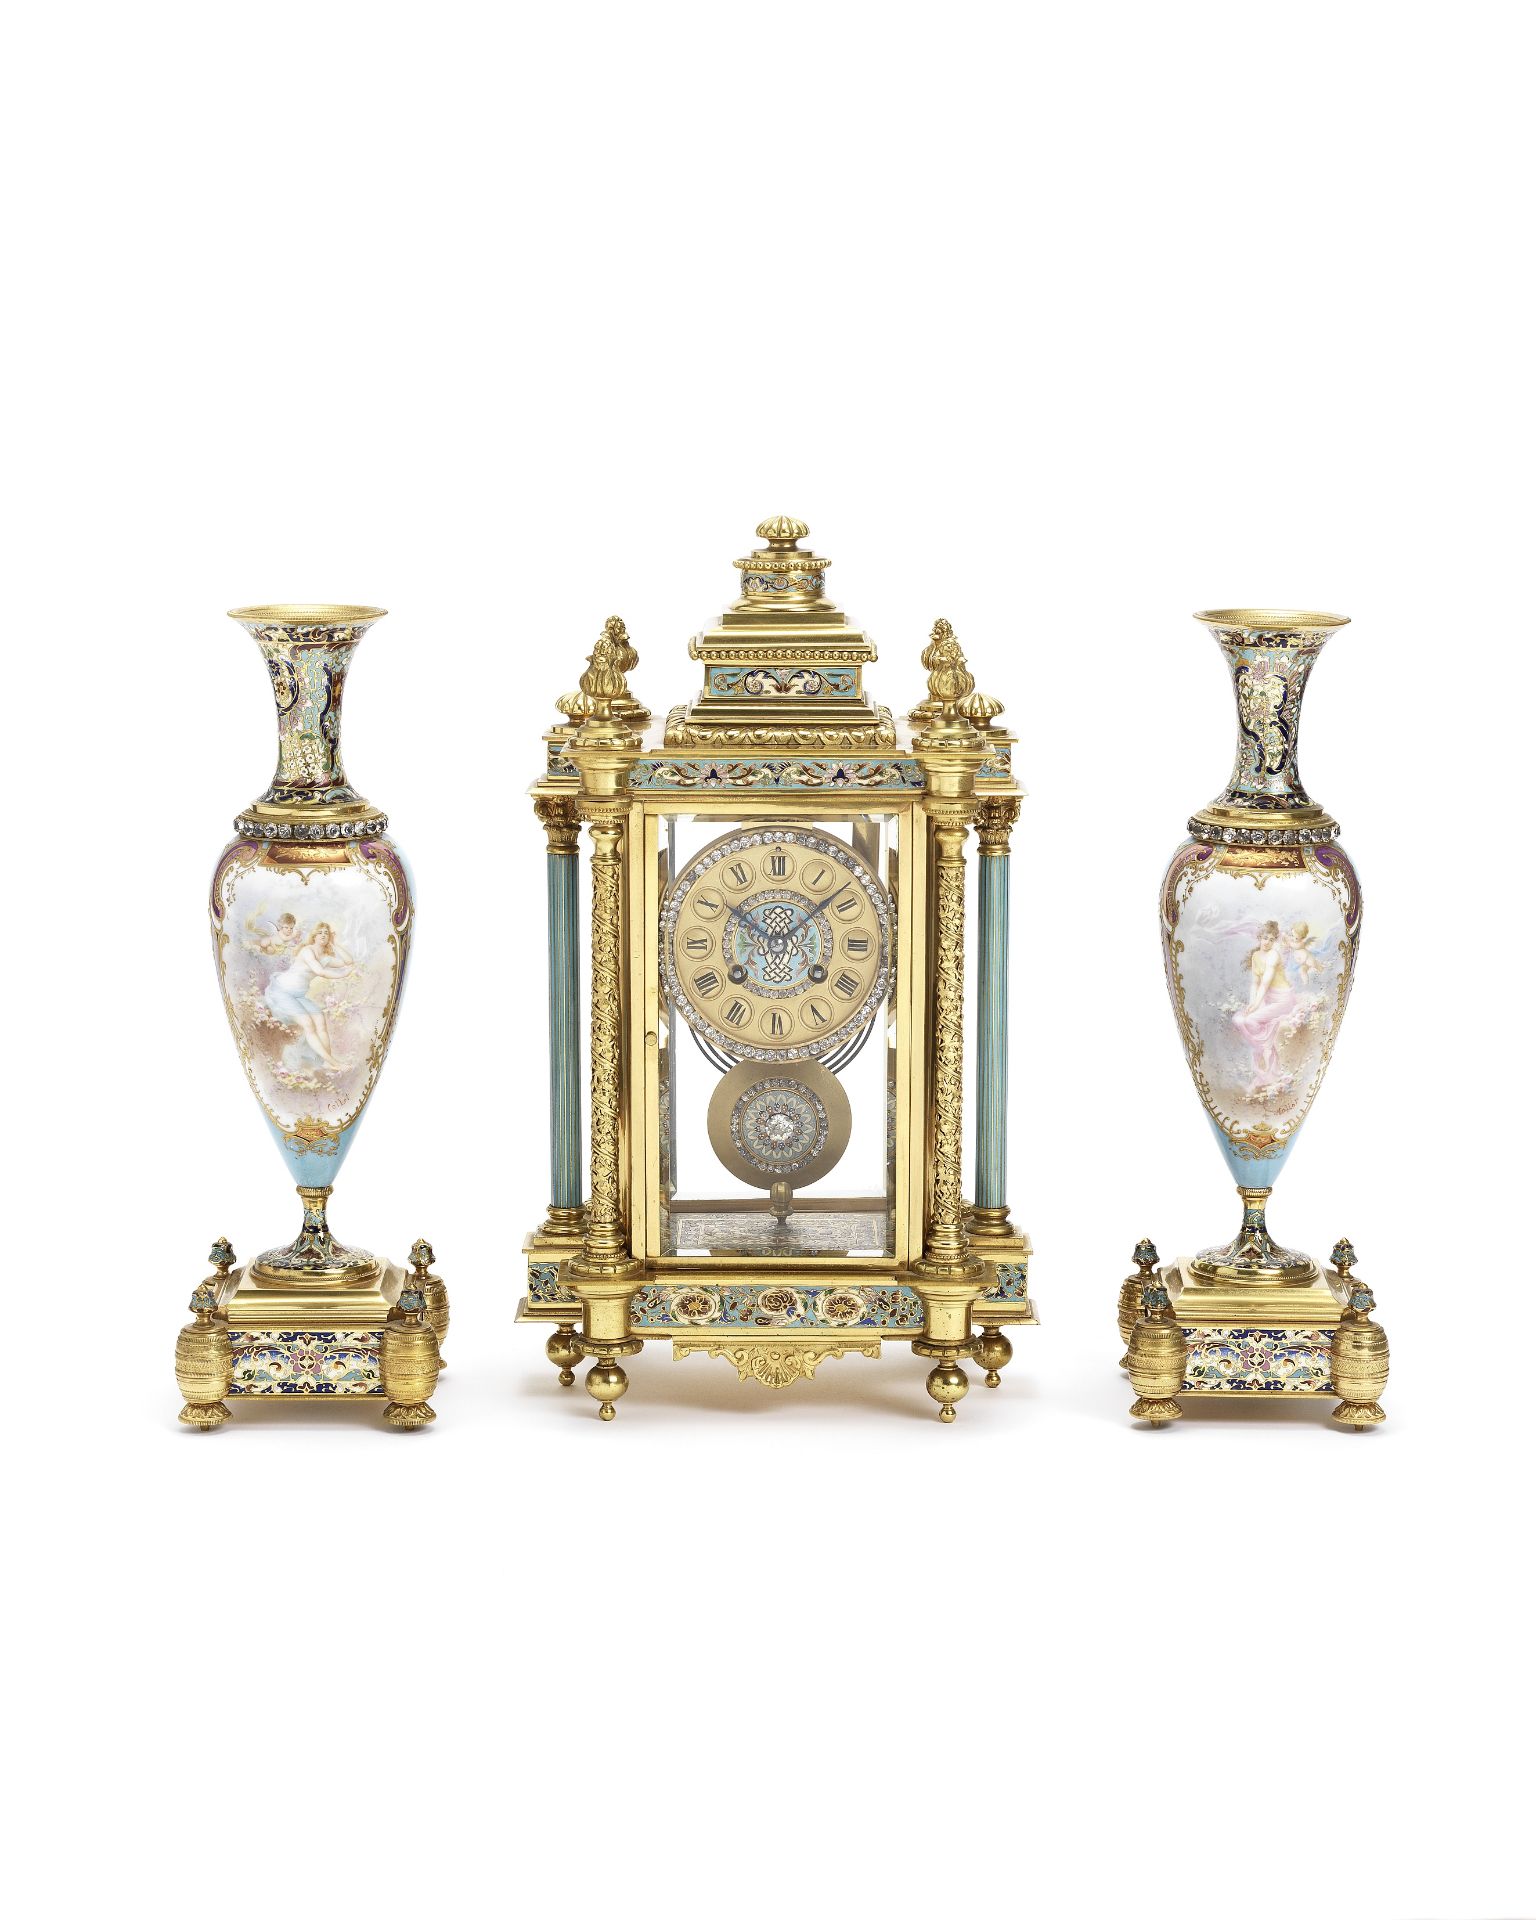 A fine late 19th century brass and cloisonné enamel mantel clock with a pair of associated vases ...